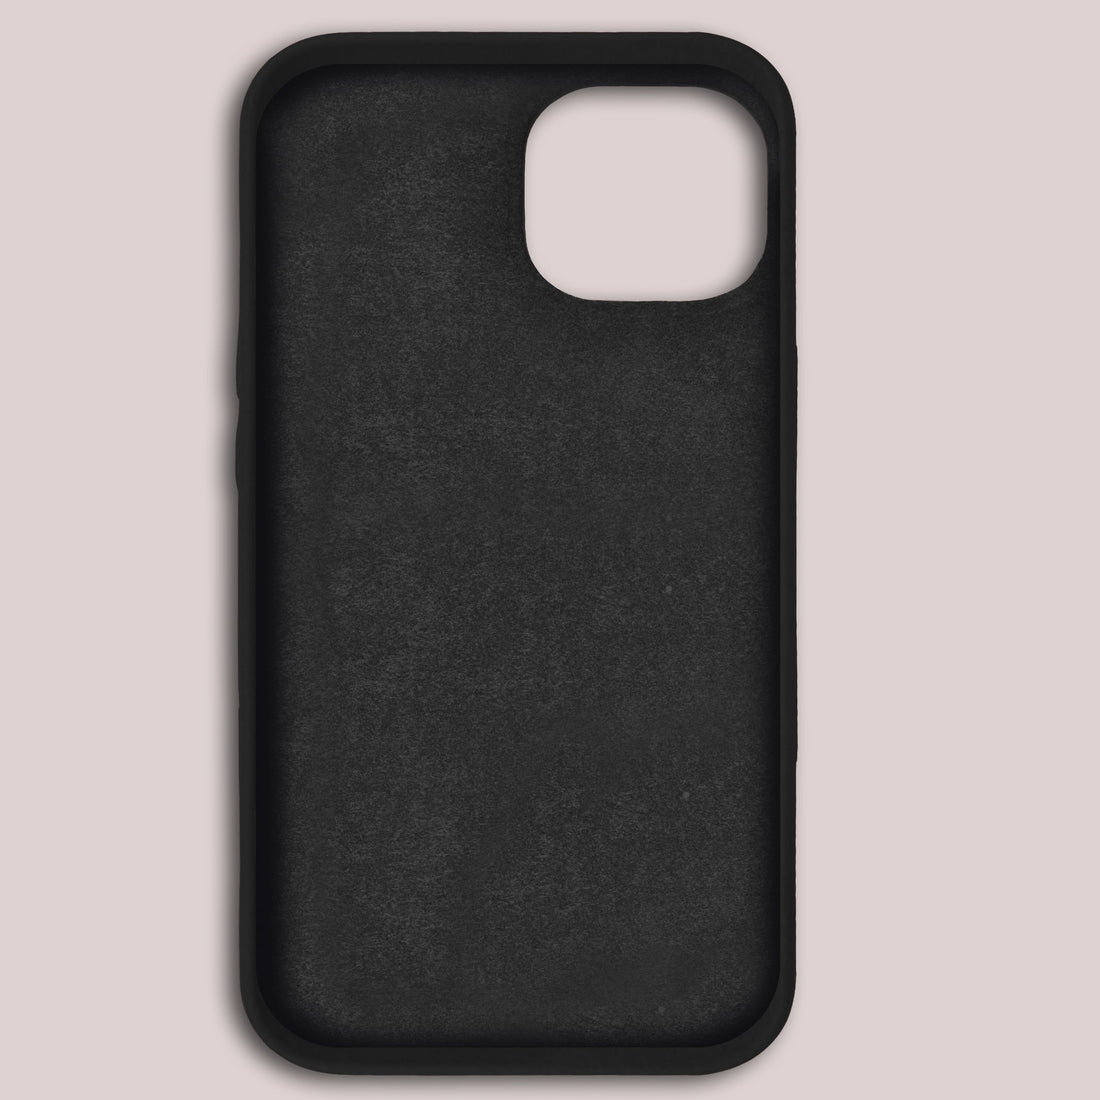 Baxter Card Case for iPhone 12 - Onyx Black